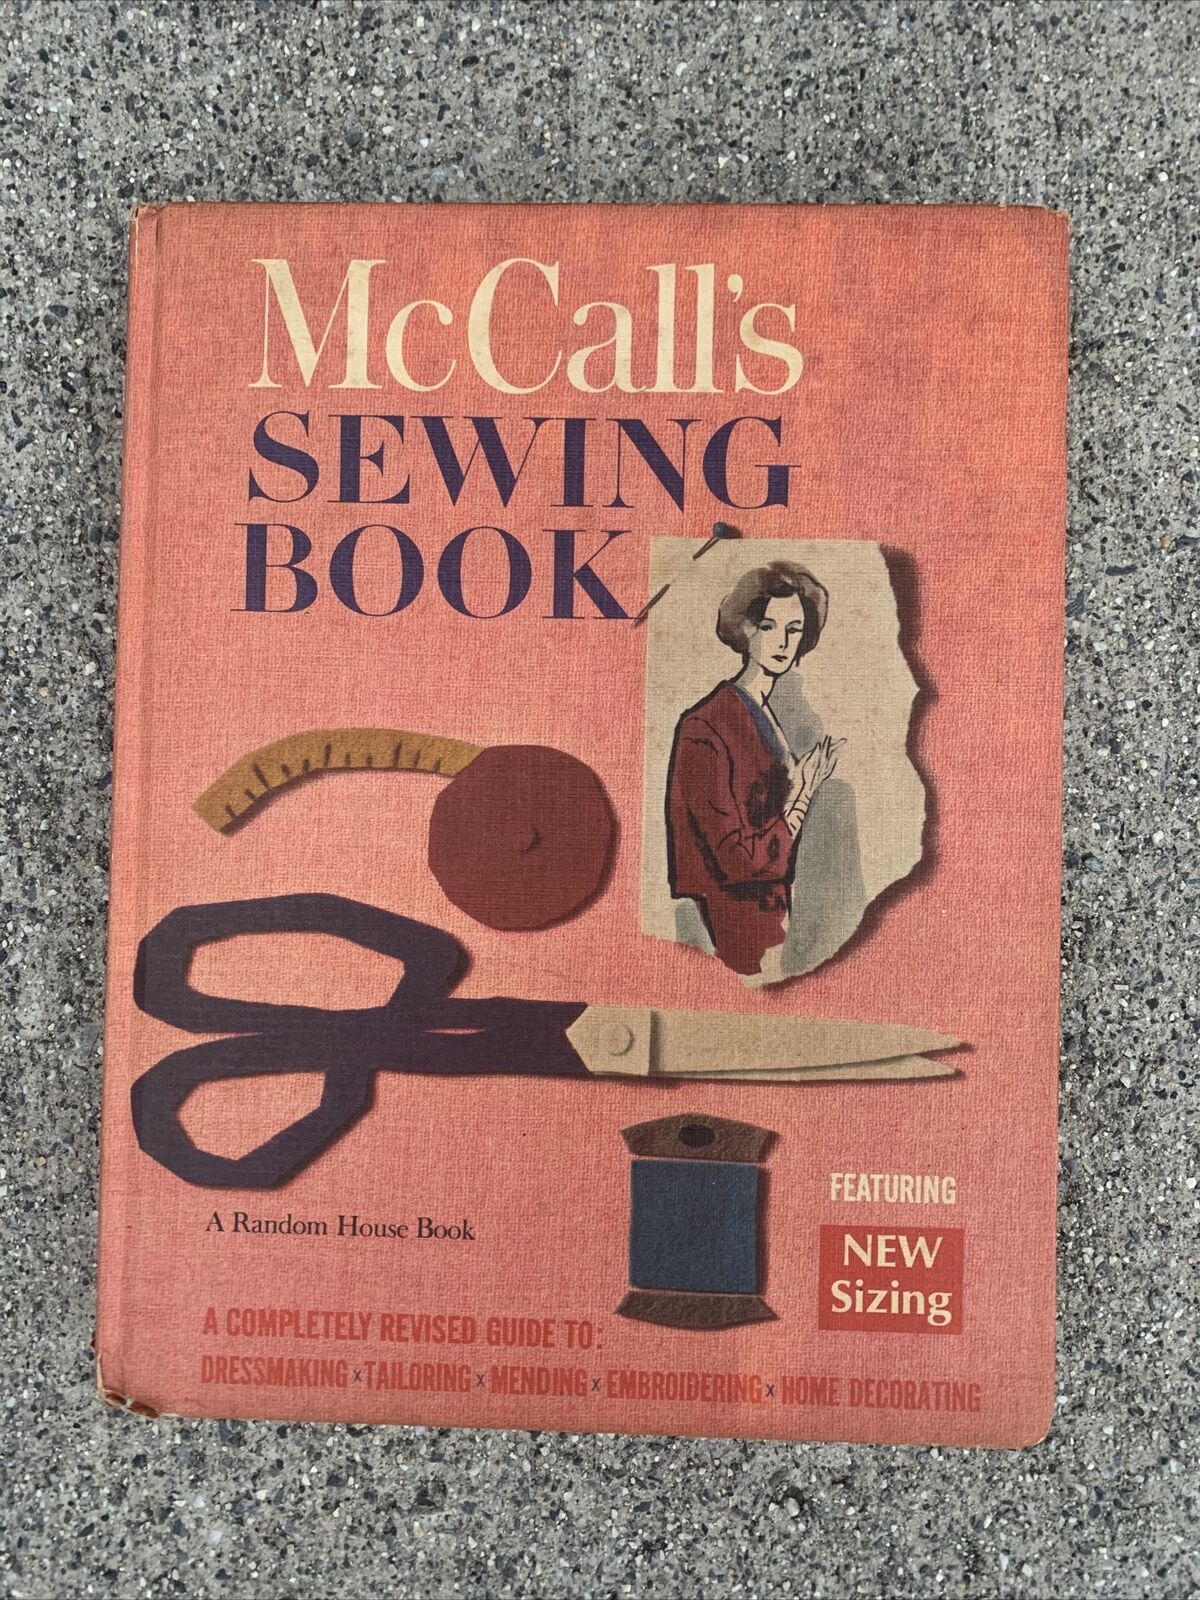 Vintage Antique McCall\'s Sewing Book Hardback 308 Pages 1960\'s Pattern RARE ❤️tb